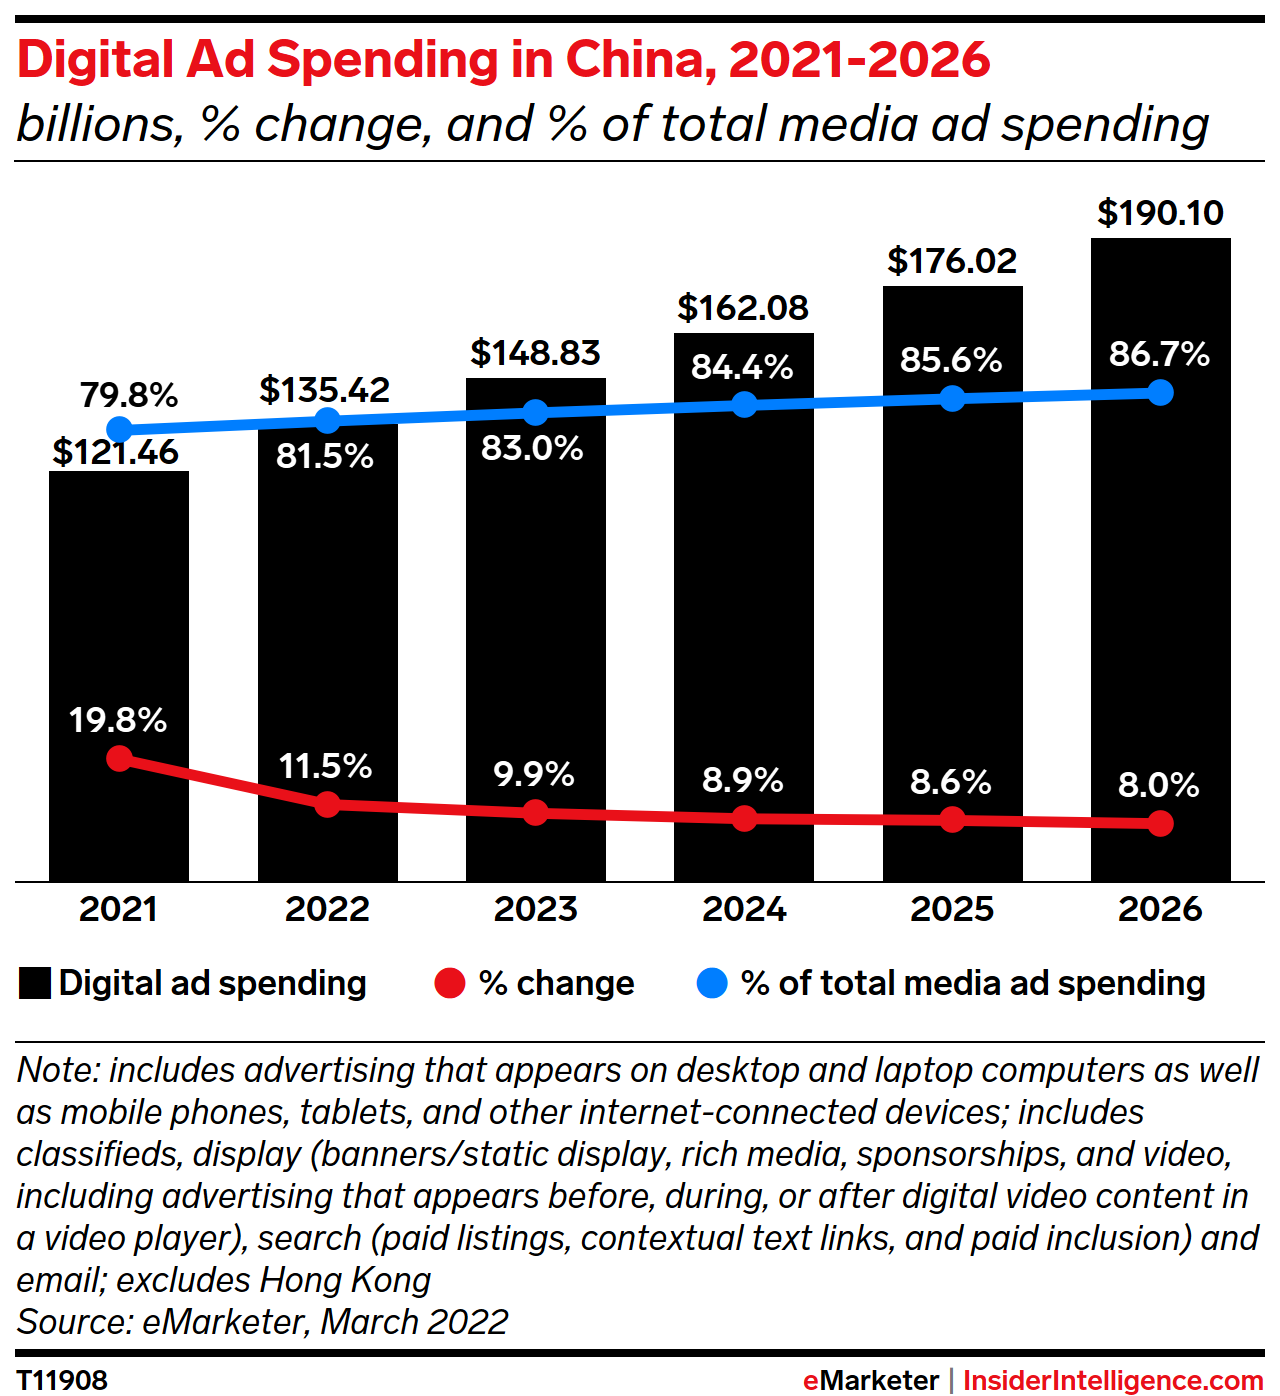 Digital Ad Spending in China, 2021-2026 (billions, % change, and % of total media ad spending)